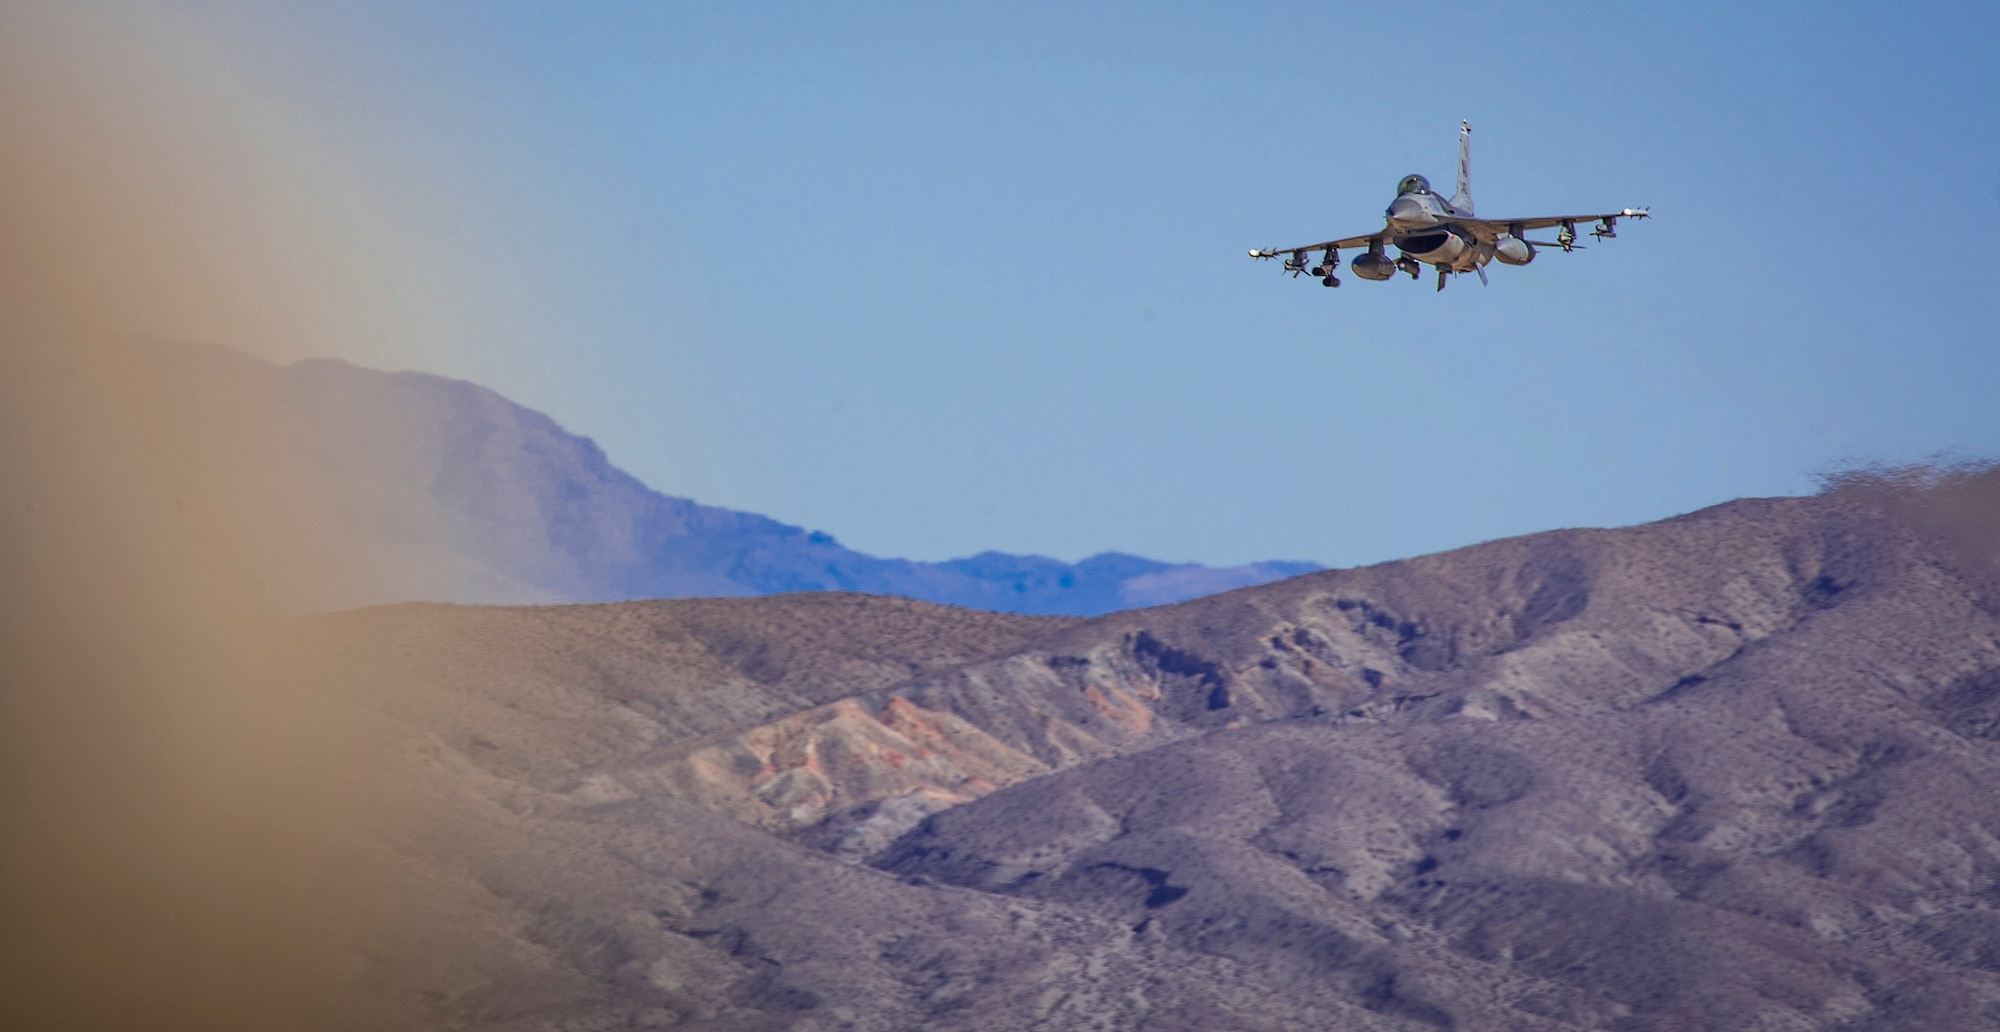 An F-16 Fighting Falcon soars over a mountain ridge in the Mojave Desert during pre-deployment training as part of a National Training Center rotation at Ft. Irwin, Calif., Feb. 20, 2018. During the month-long rotation, 93d Air Ground Operations Wing units embedded with approximately 4,000 soldiers in the largest force-on-force live-fire exercise in the world. The 93d AGOW provided tactical air control party support to enhance interoperability for major combat operations downrange. (U.S. Air Force photo by Senior Airman Greg Nash)